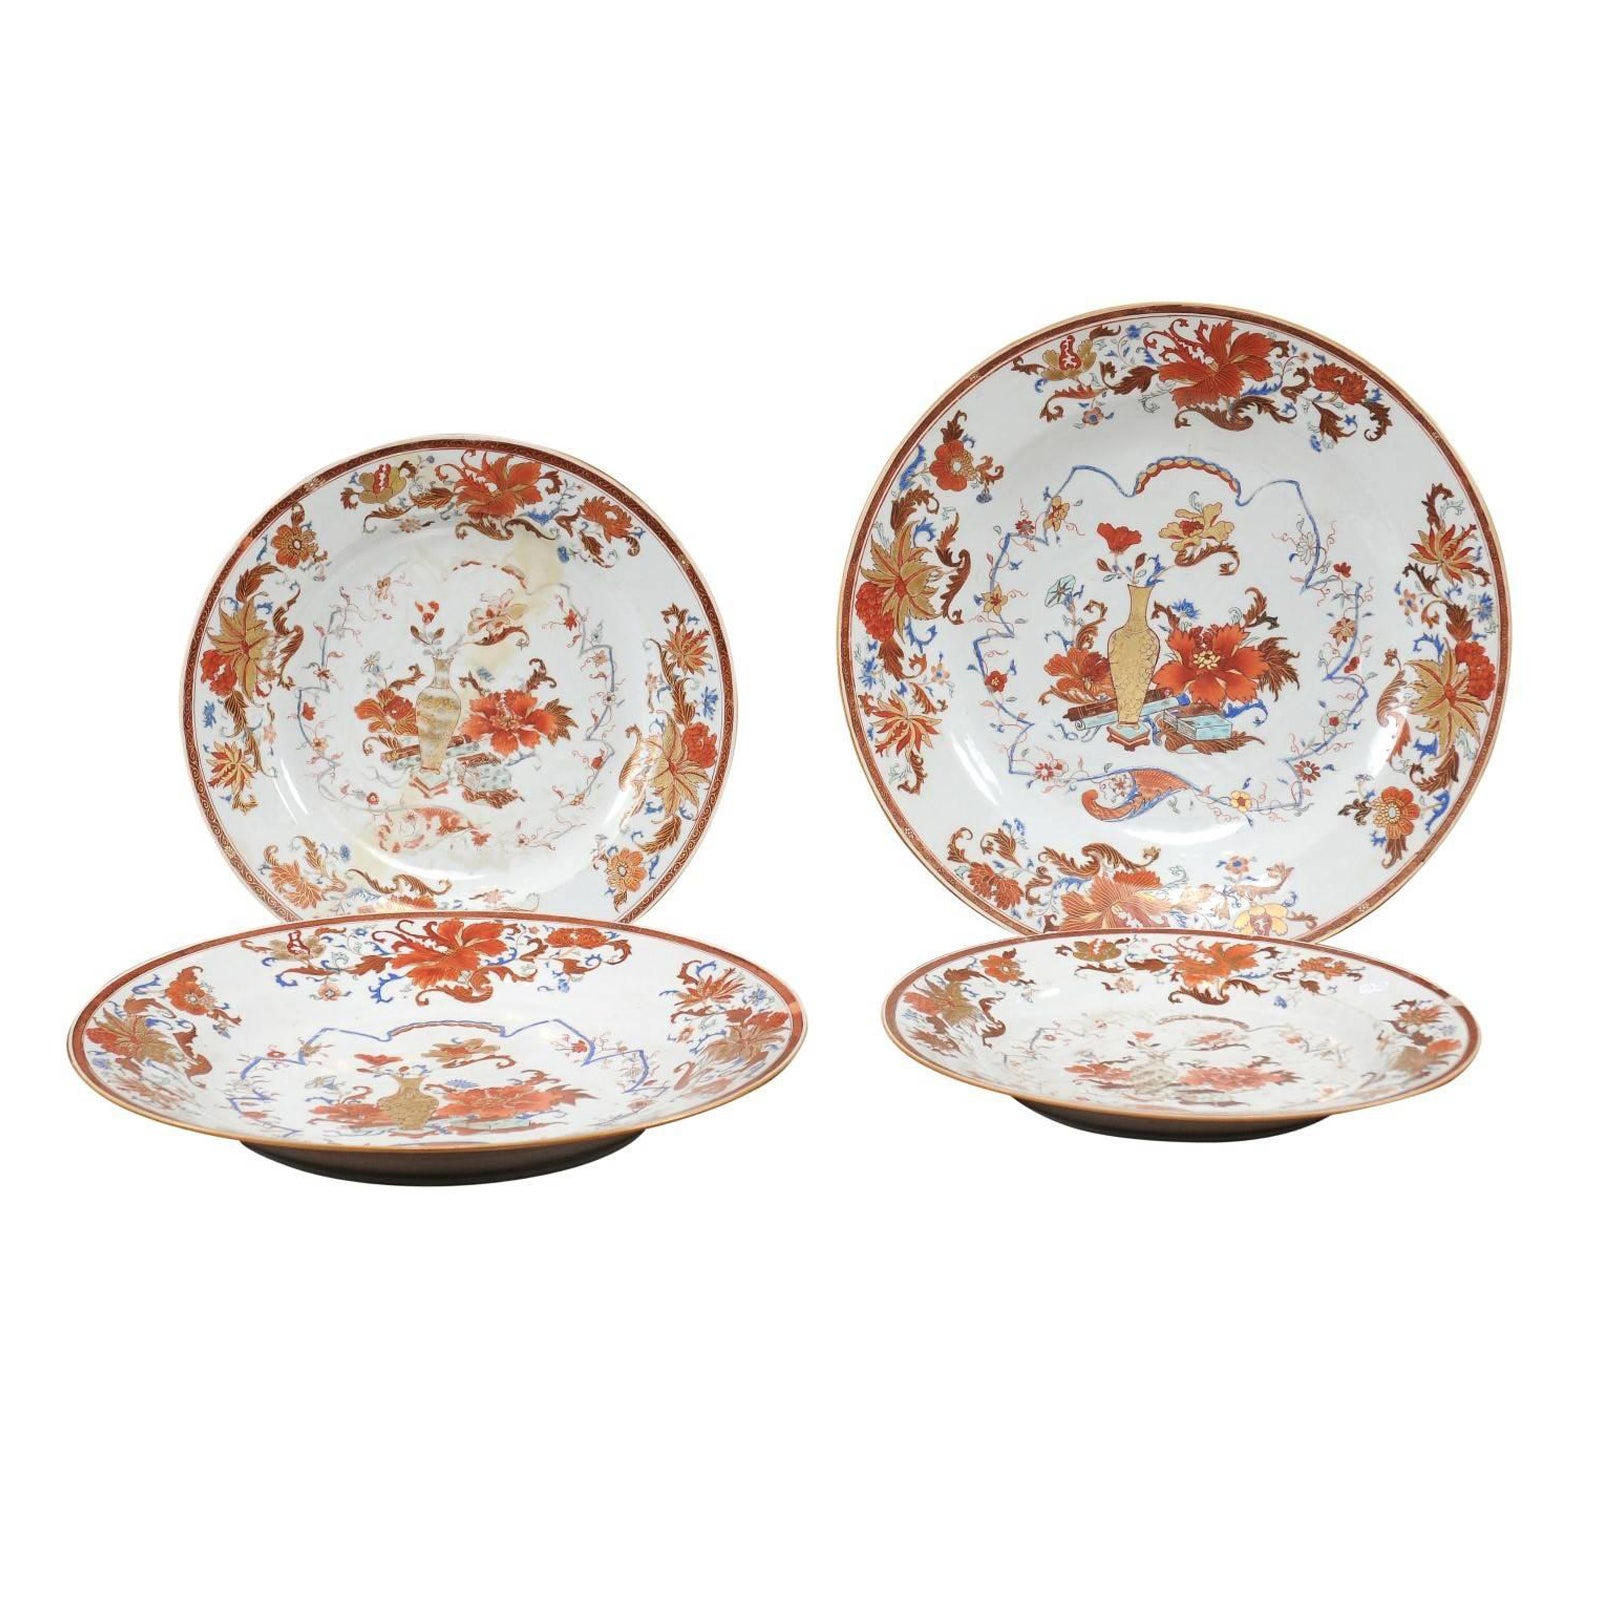 Set of 4 18th Century Chinese Export Imari Porcelain Chargers in 2 Sizes For Sale